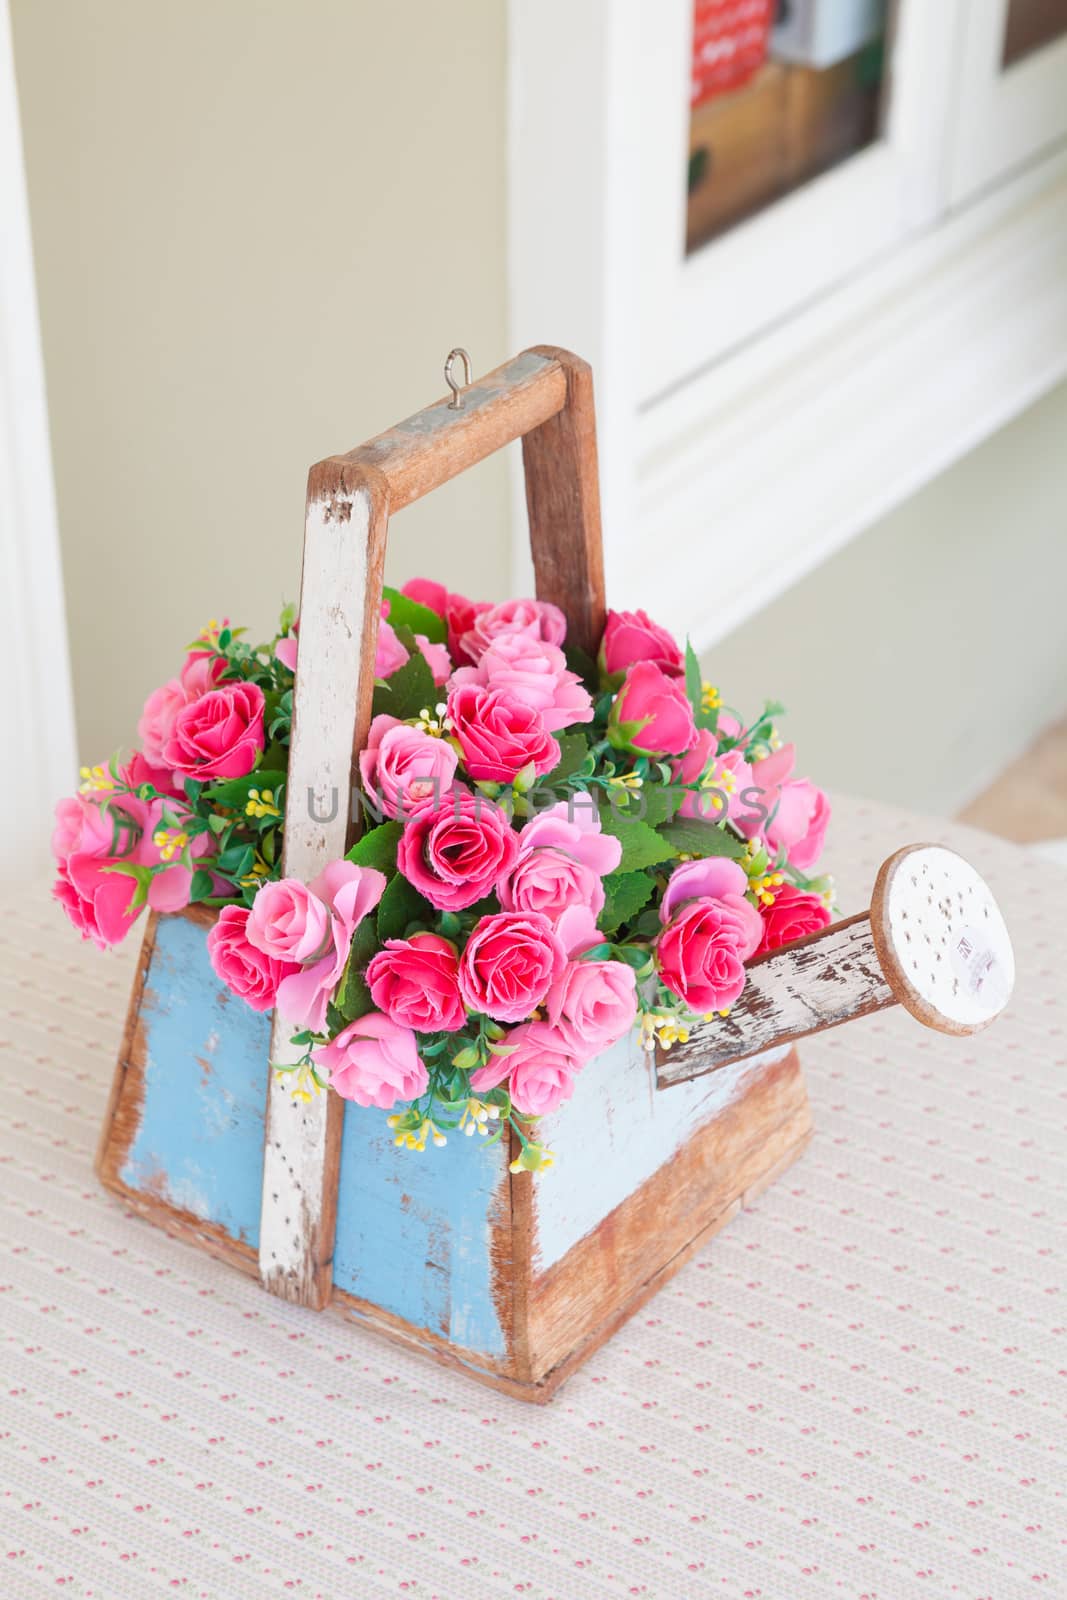 Roses in wood basket on wood table